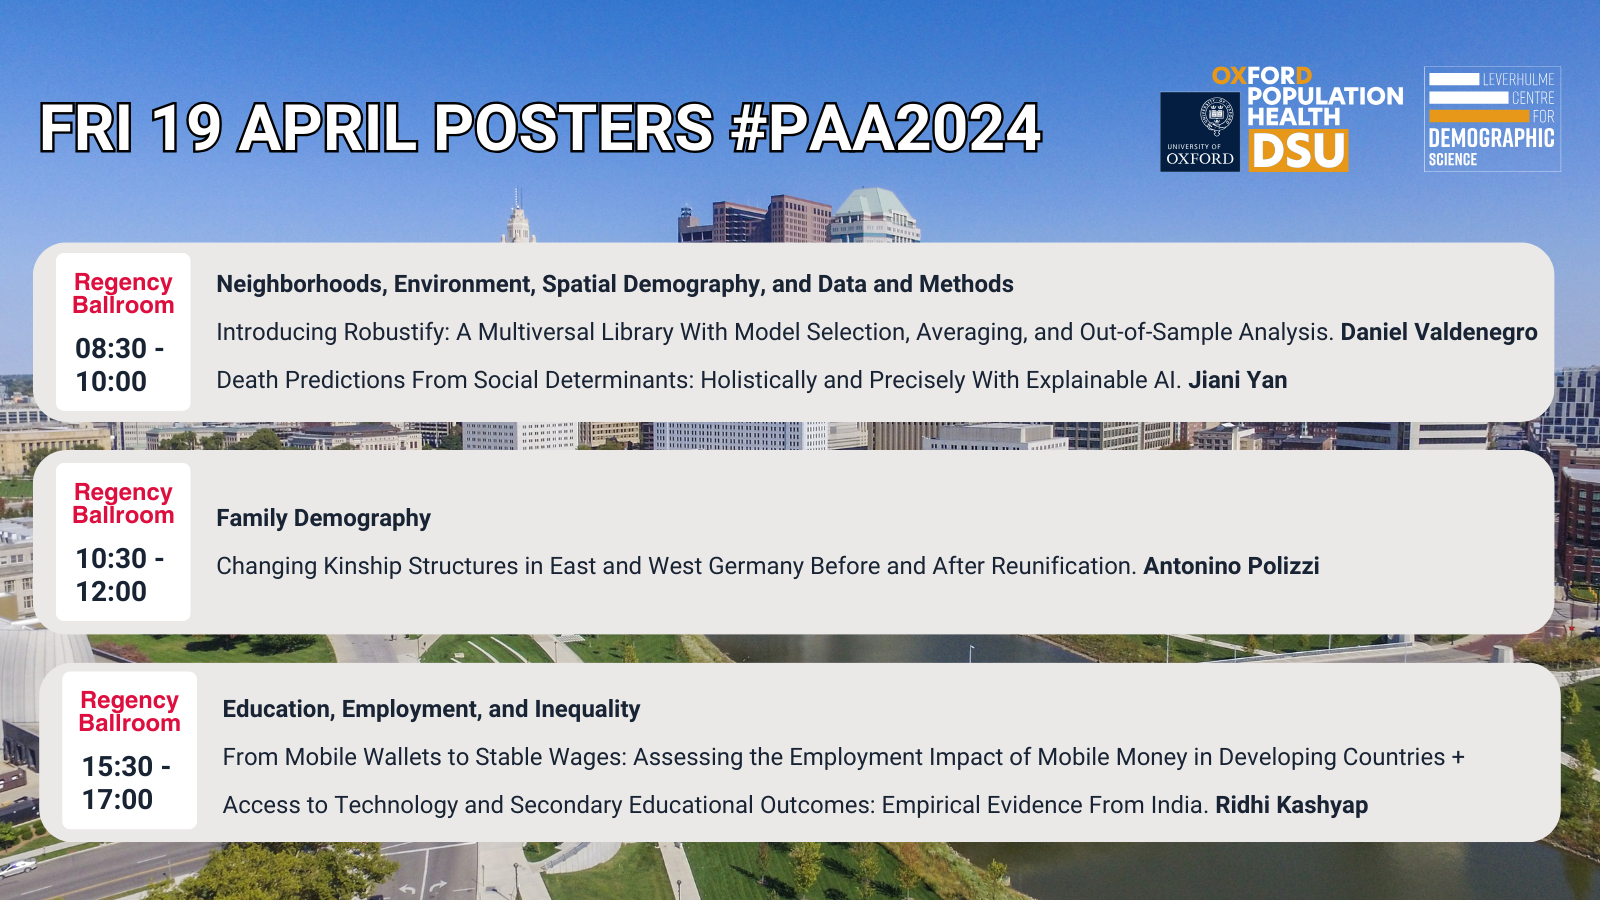 LCDS posters at PAA 2024 on Friday 19 April